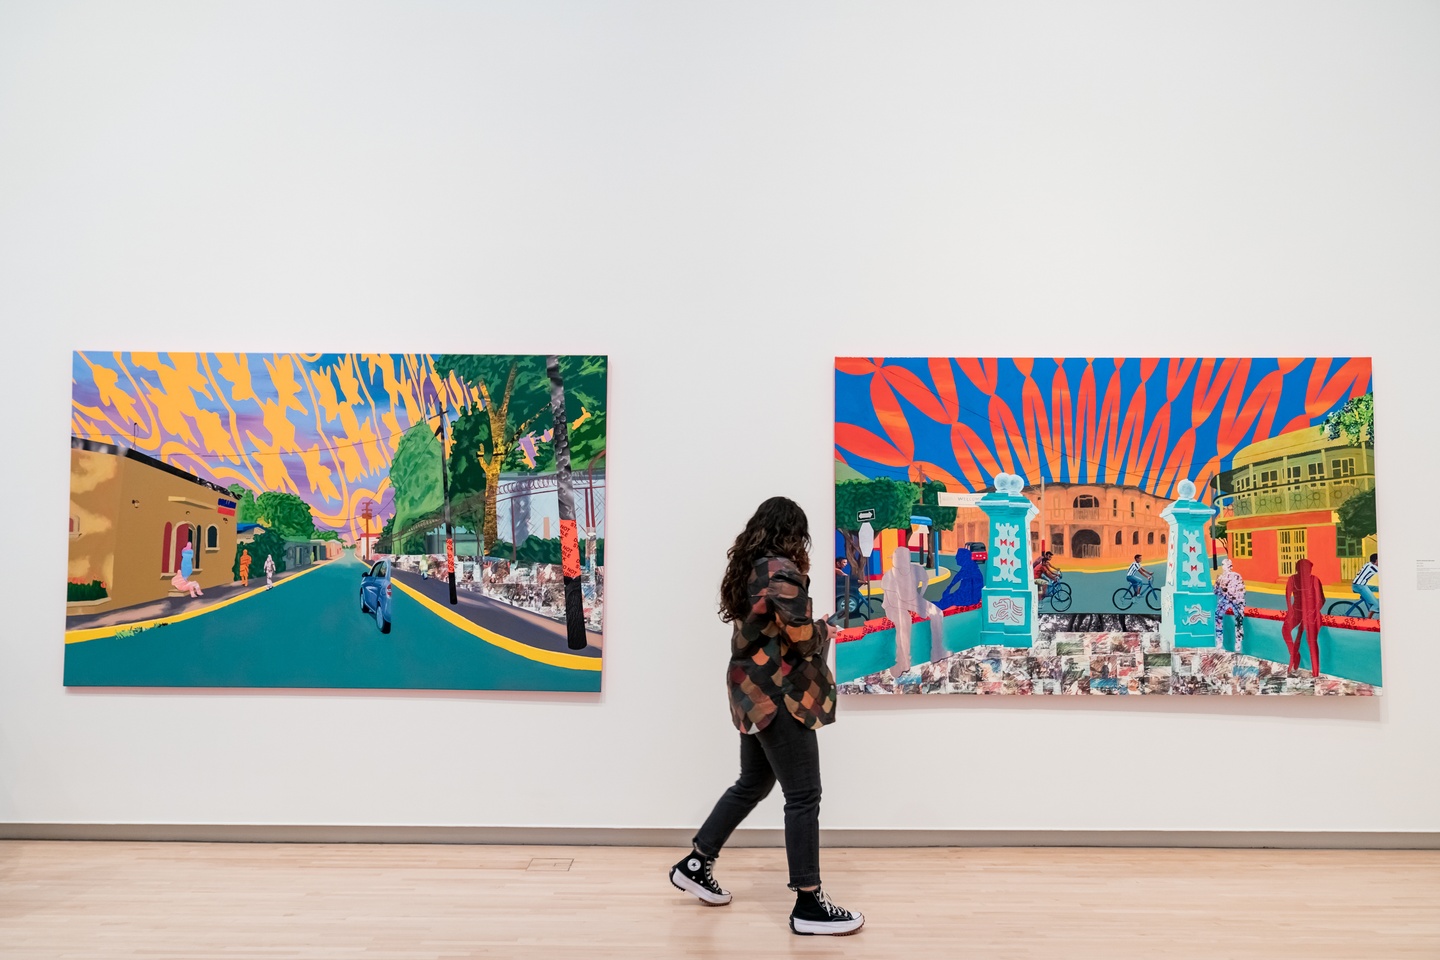 A visitor observes two large brightly colored and patterned paintings. The one on the left depict a narrow roadside and the one on the right depicts a town square.